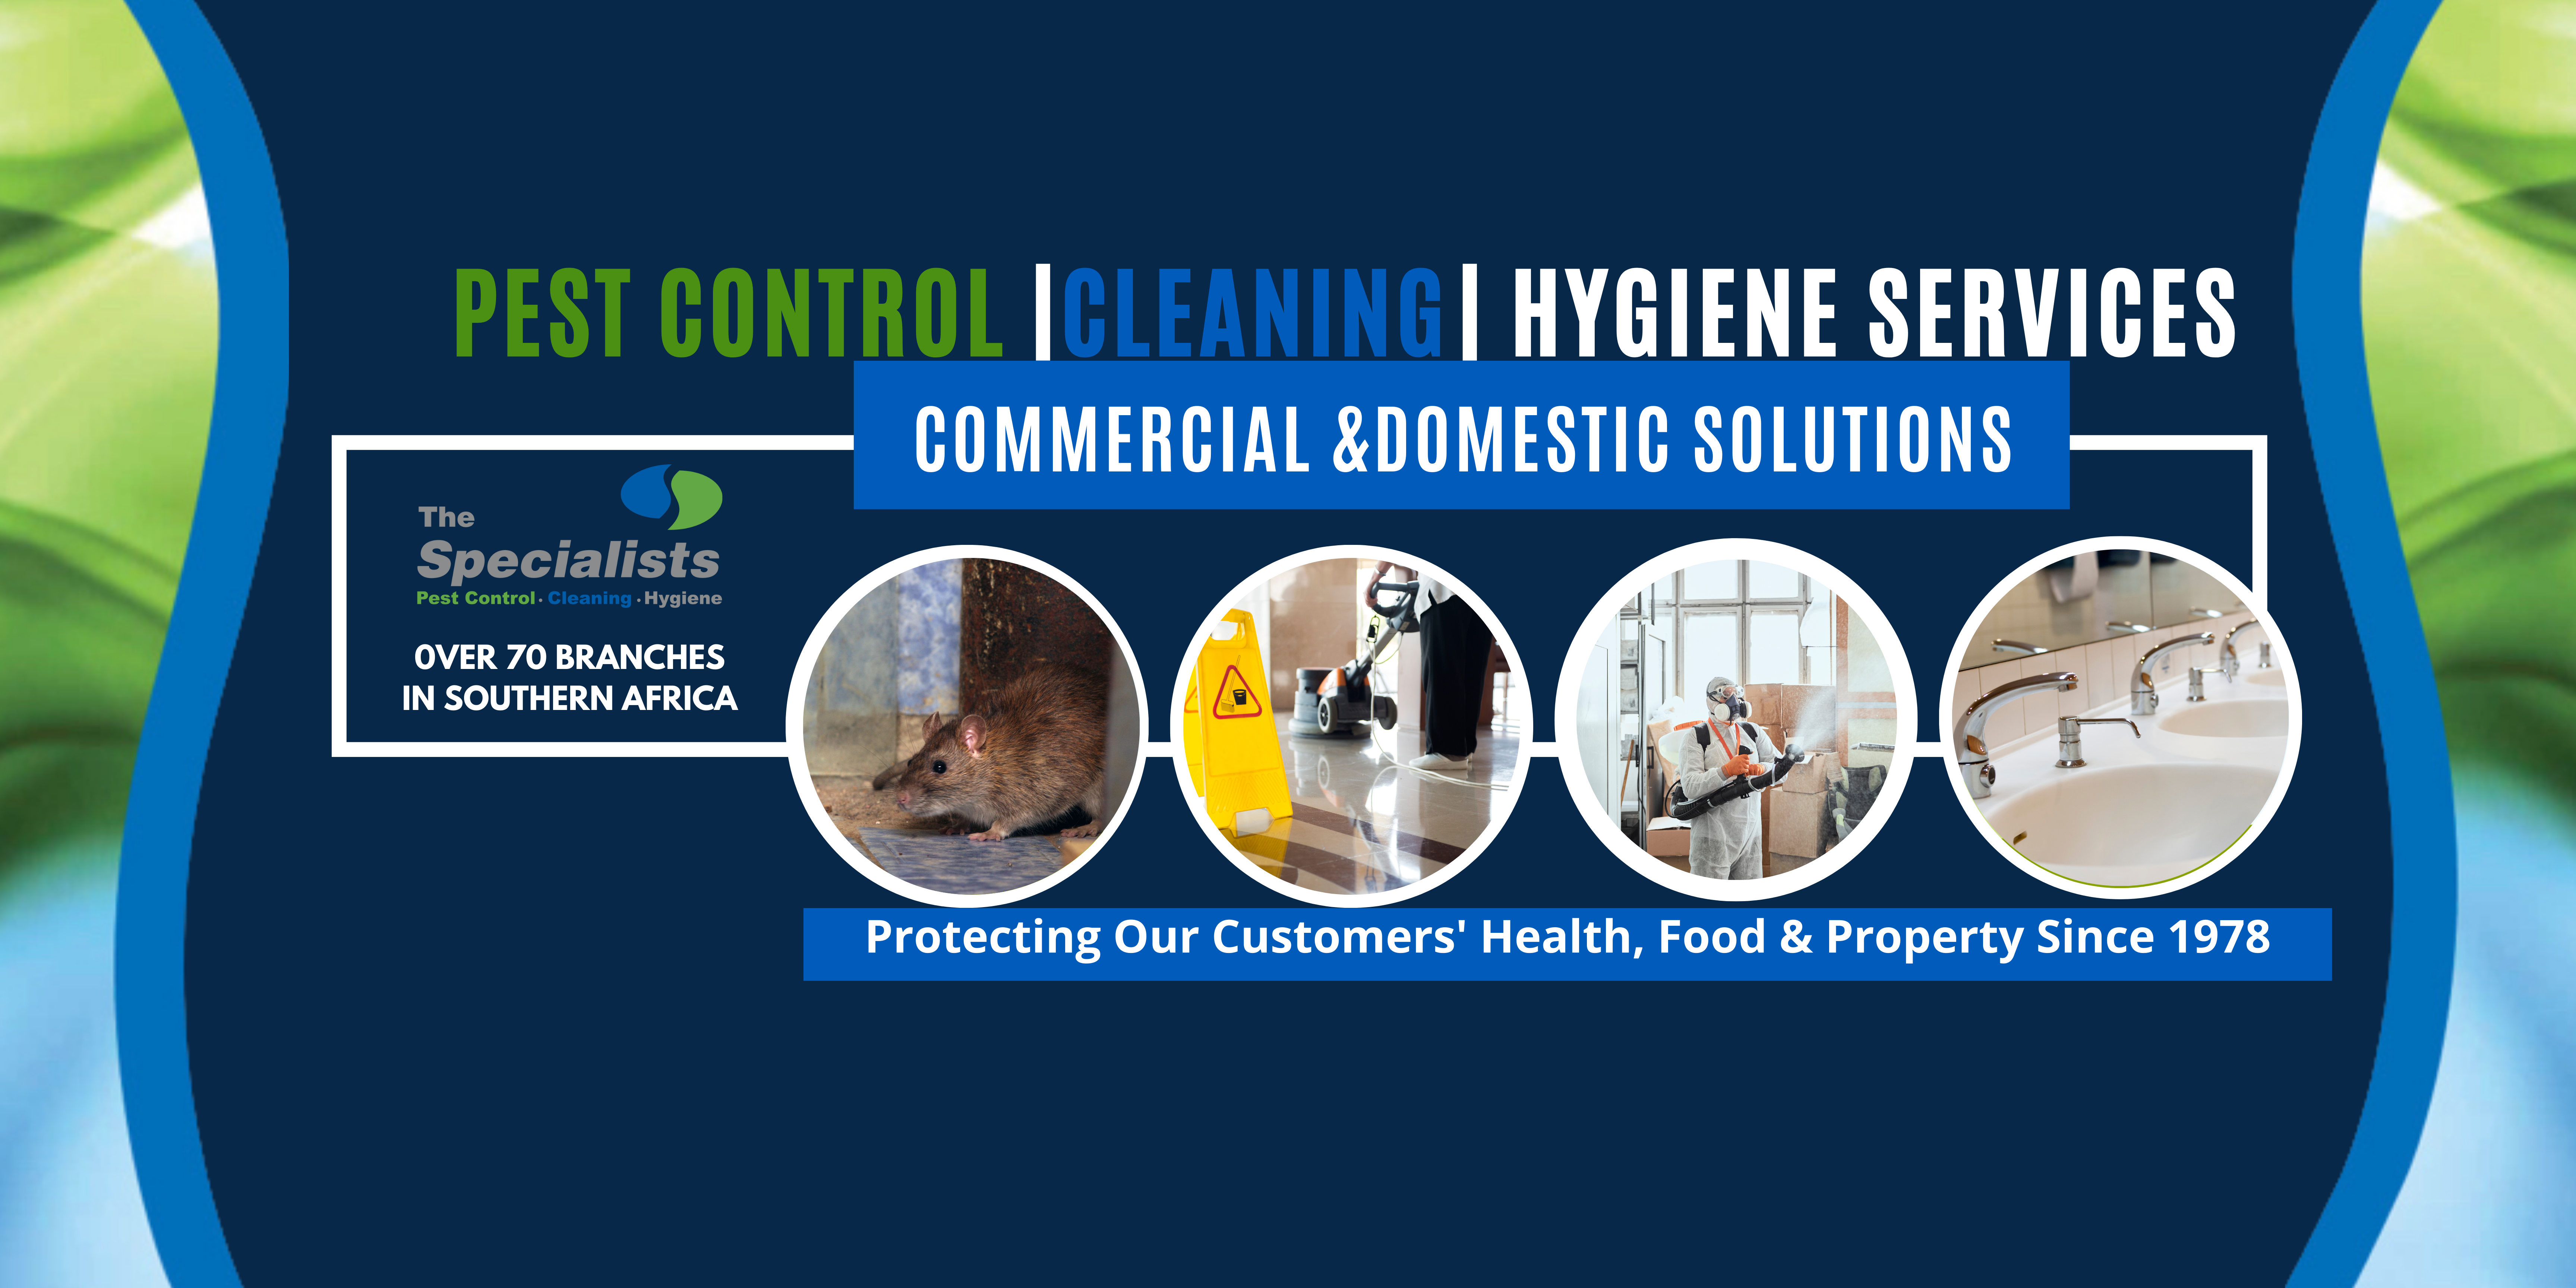 LINKEDIn Pest Proof . commercial Cleaning Services HYGIENE Service - South Africa